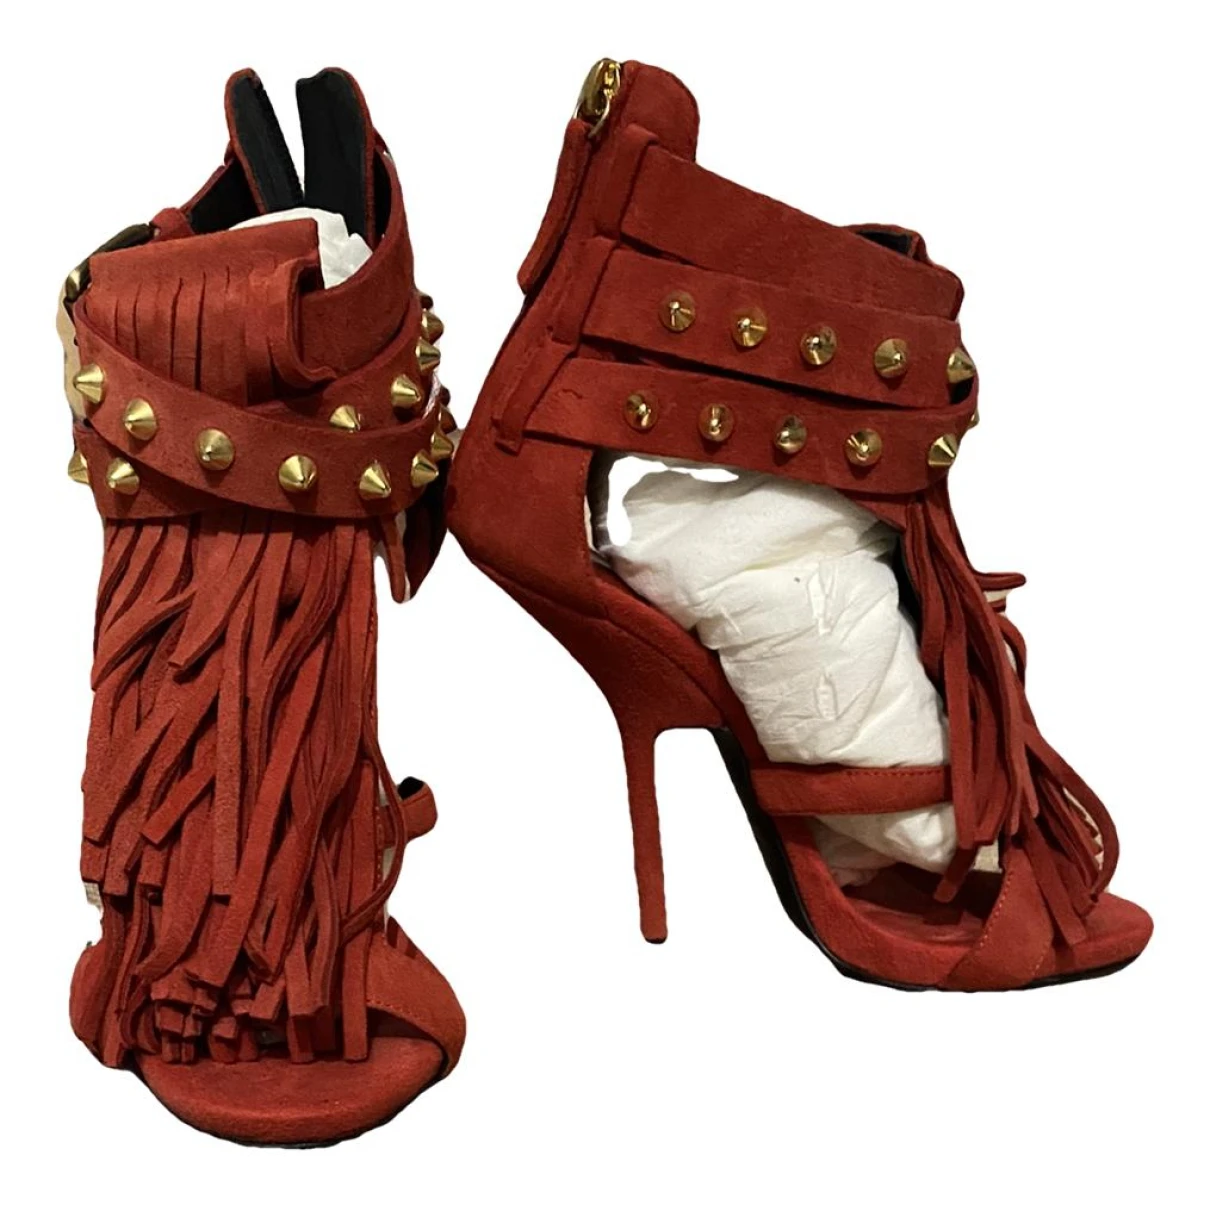 Pre-owned Giuseppe Zanotti Leather Sandals In Red